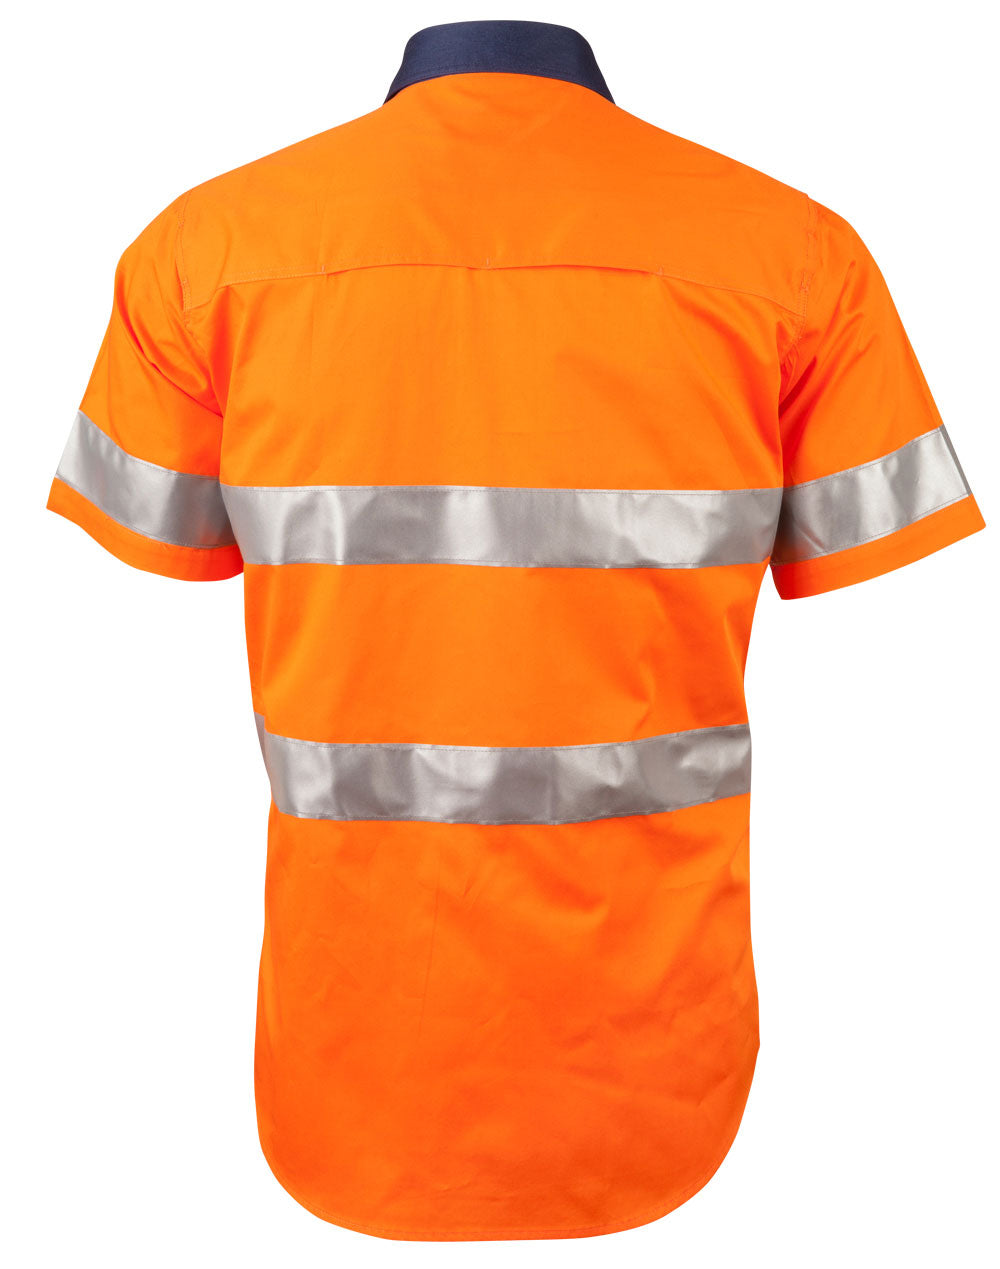 Winning Spirit Men's High Visibility Cool-Breeze Cotton Twill Safety Shirts With Reflective 3M Tapes-(SW59)